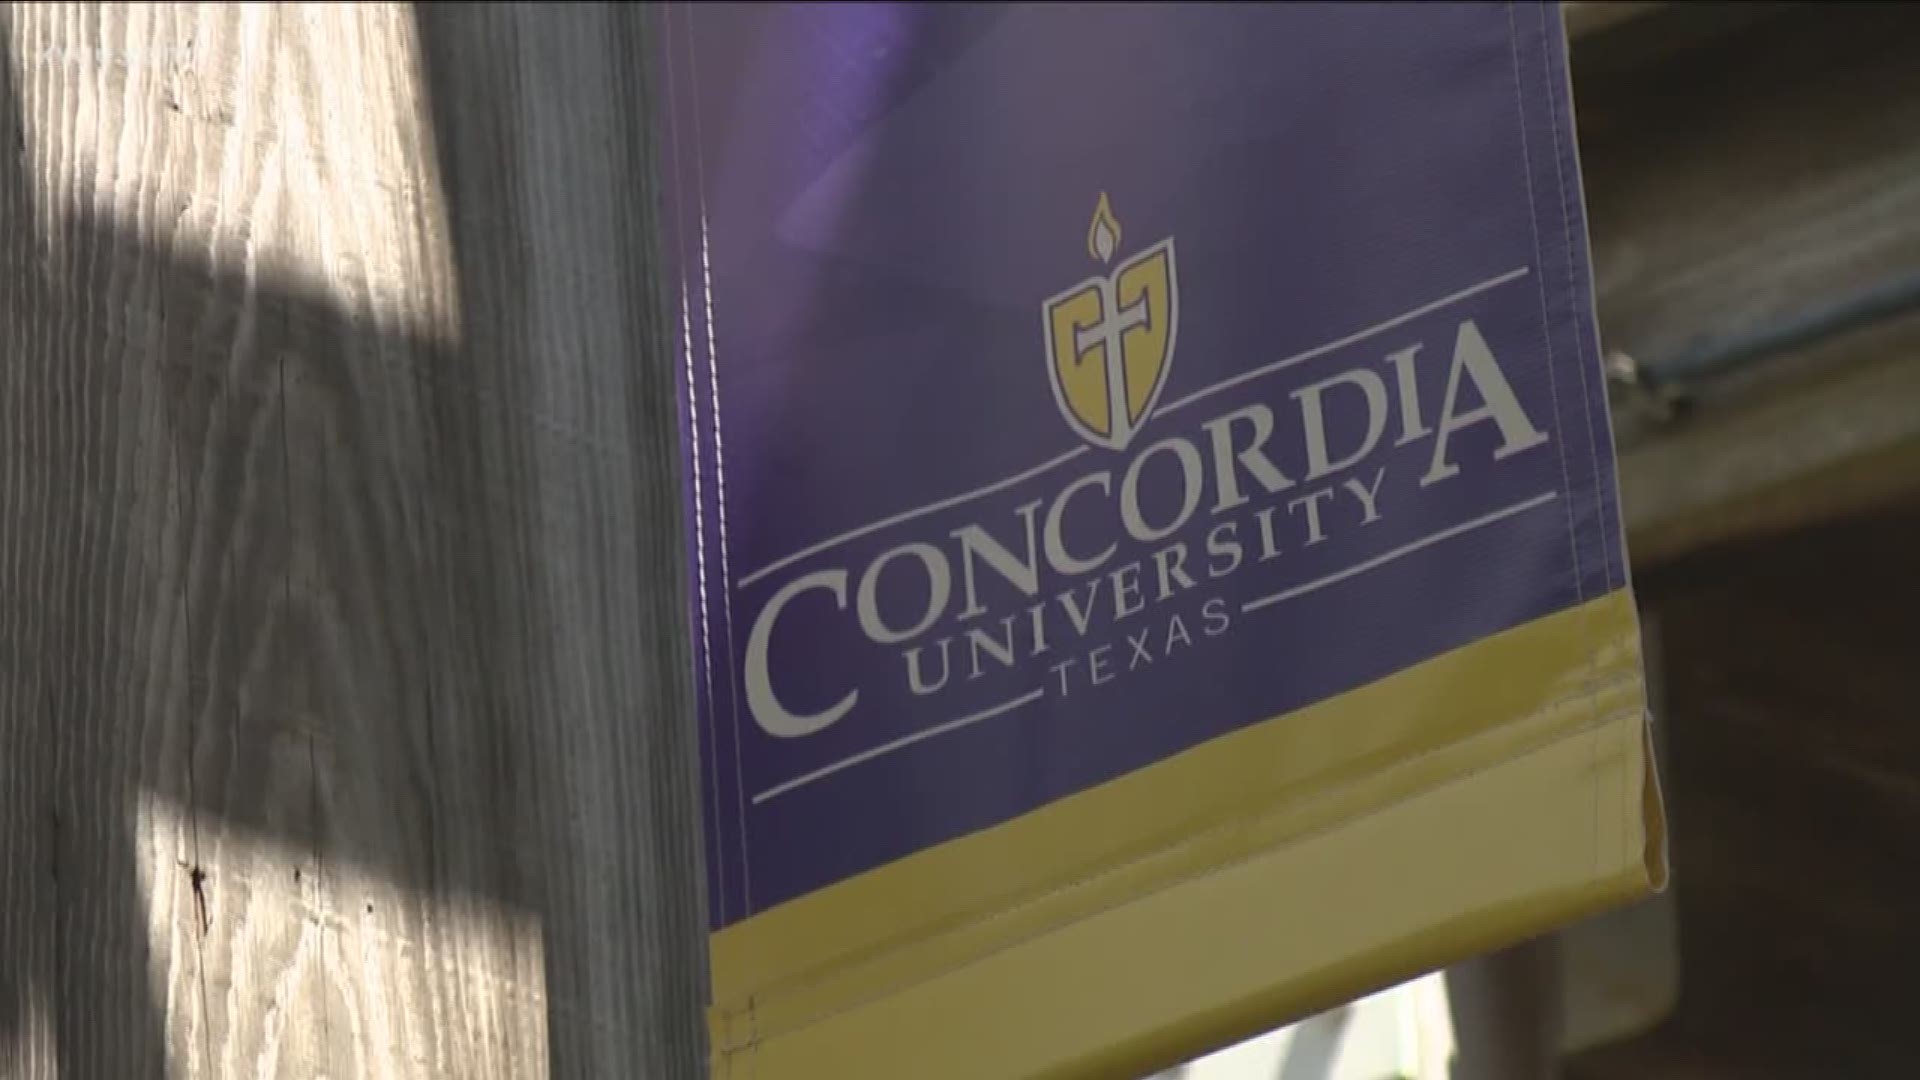 Concordia University is getting recognized for its commitment to student diversity.